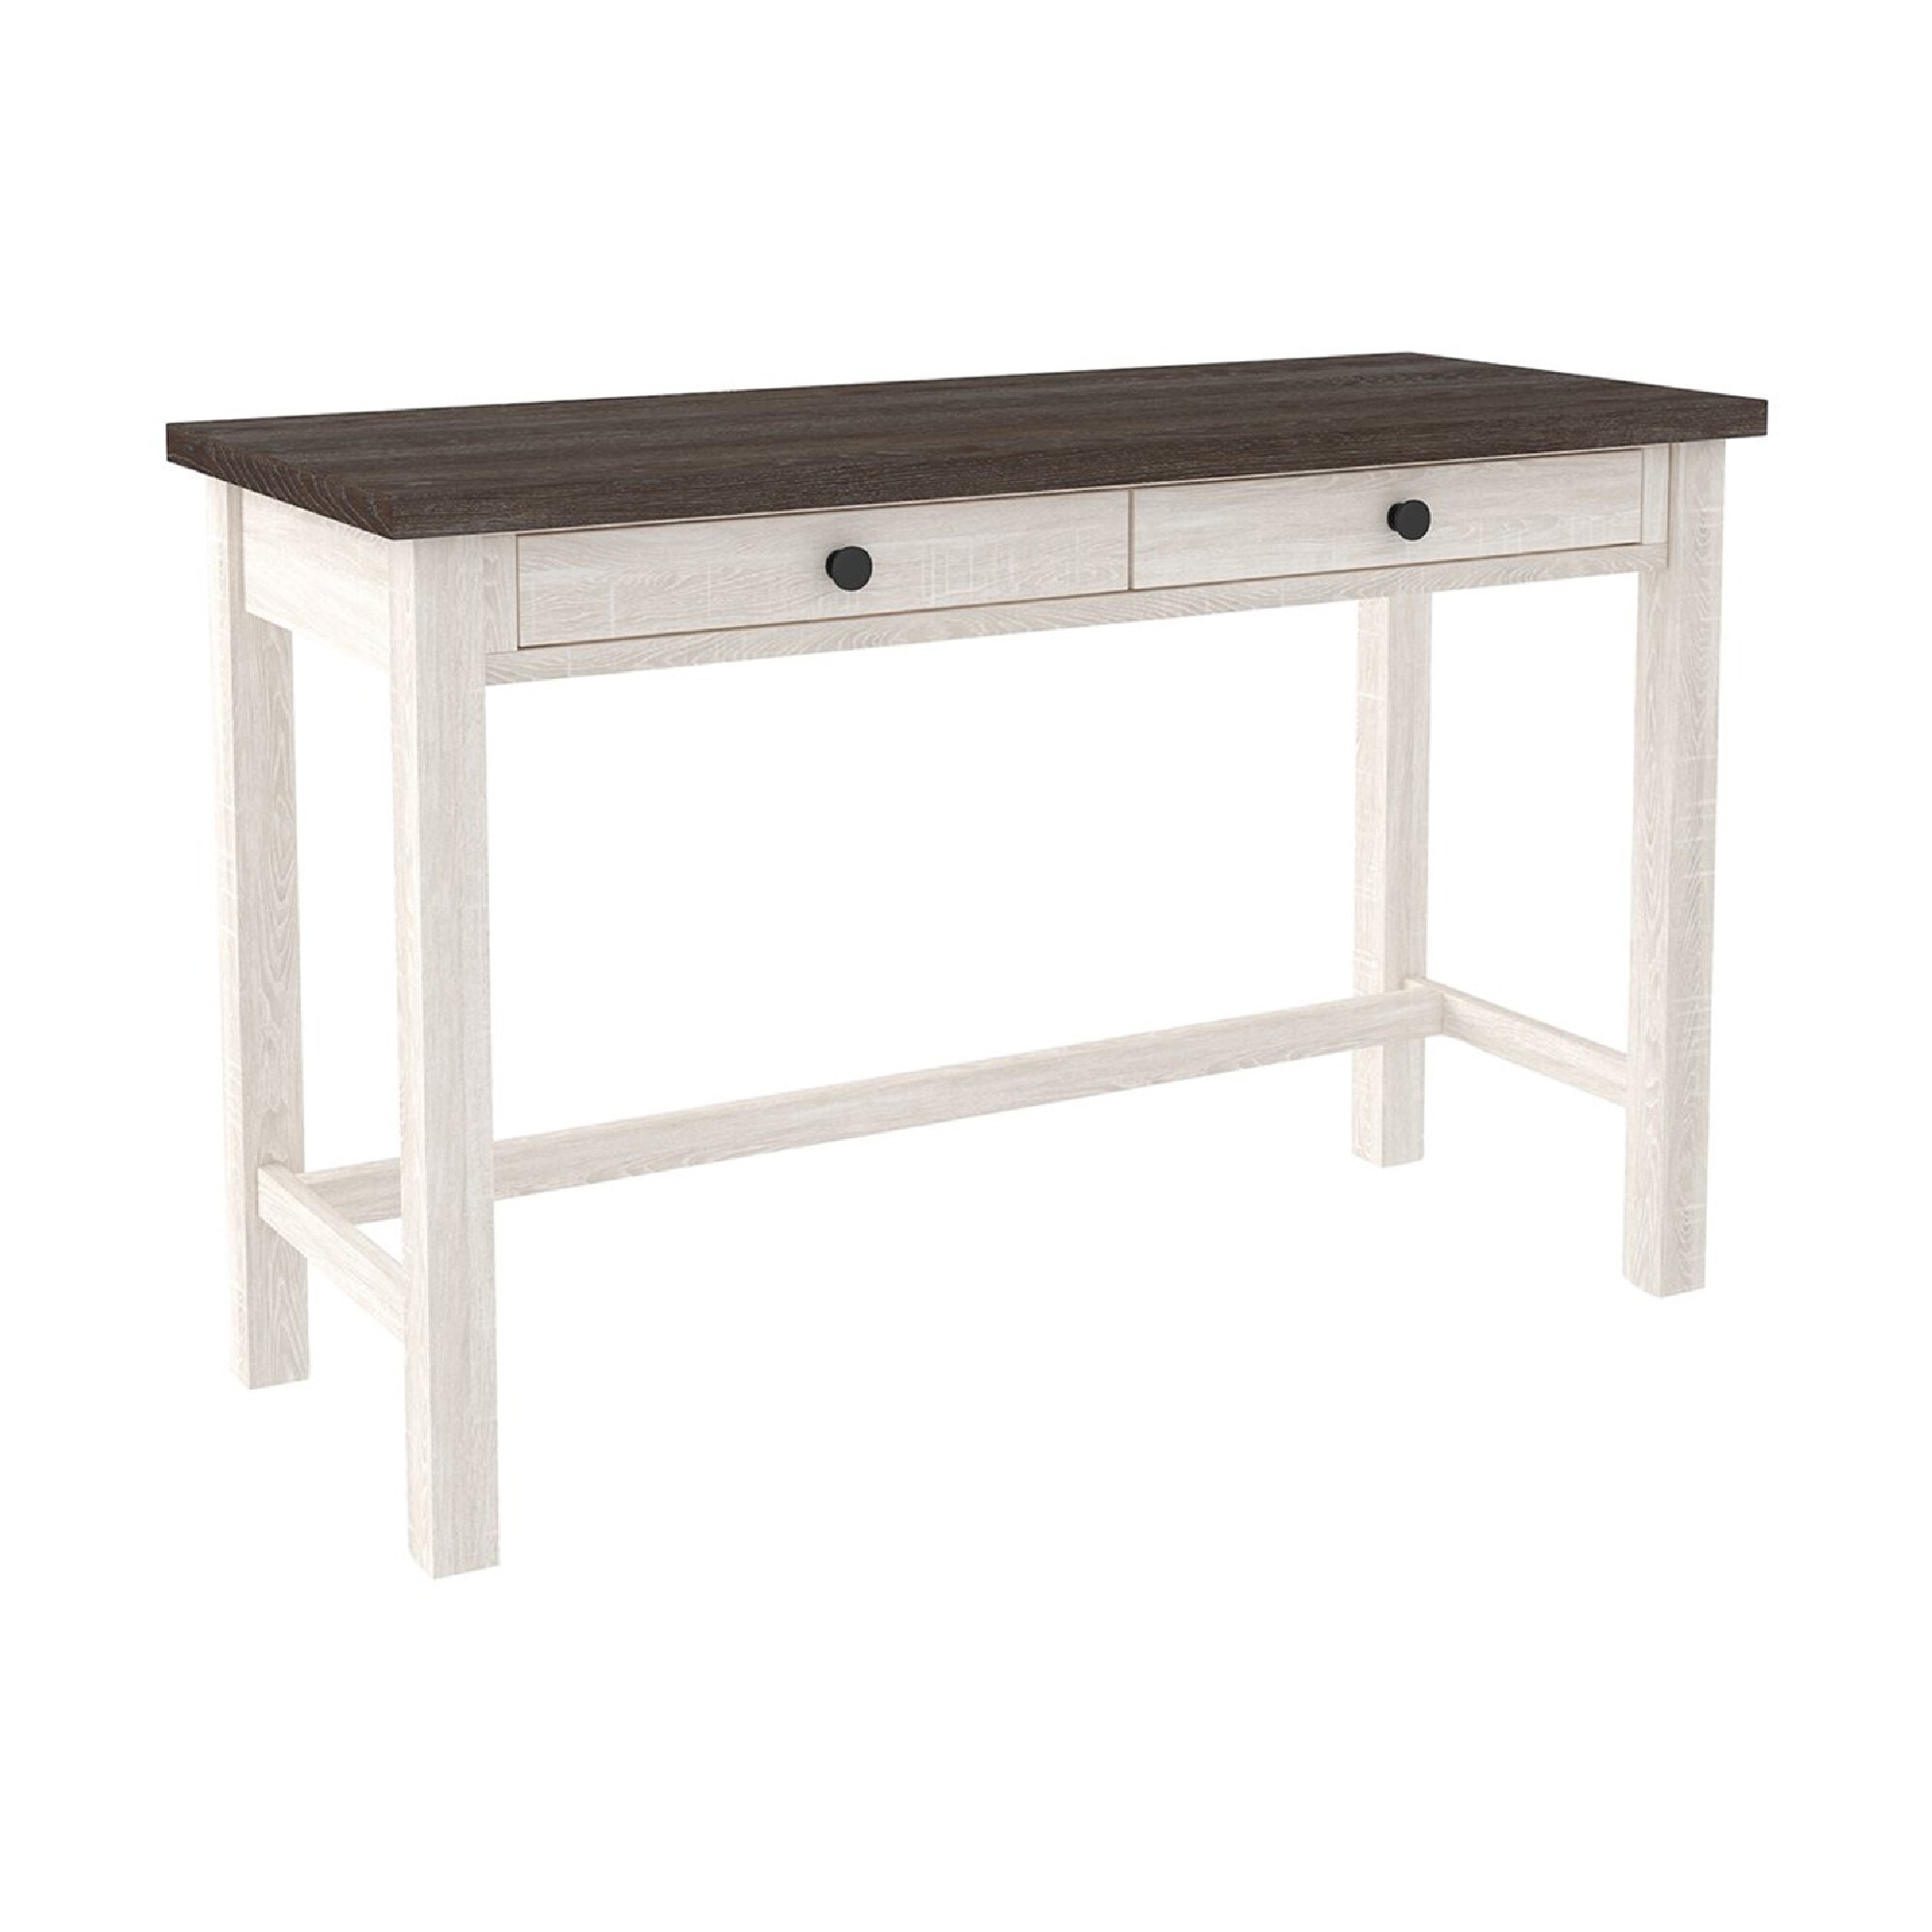 Wooden Writing Desk with Block Legs and 2 Storage Drawers, Gray and White